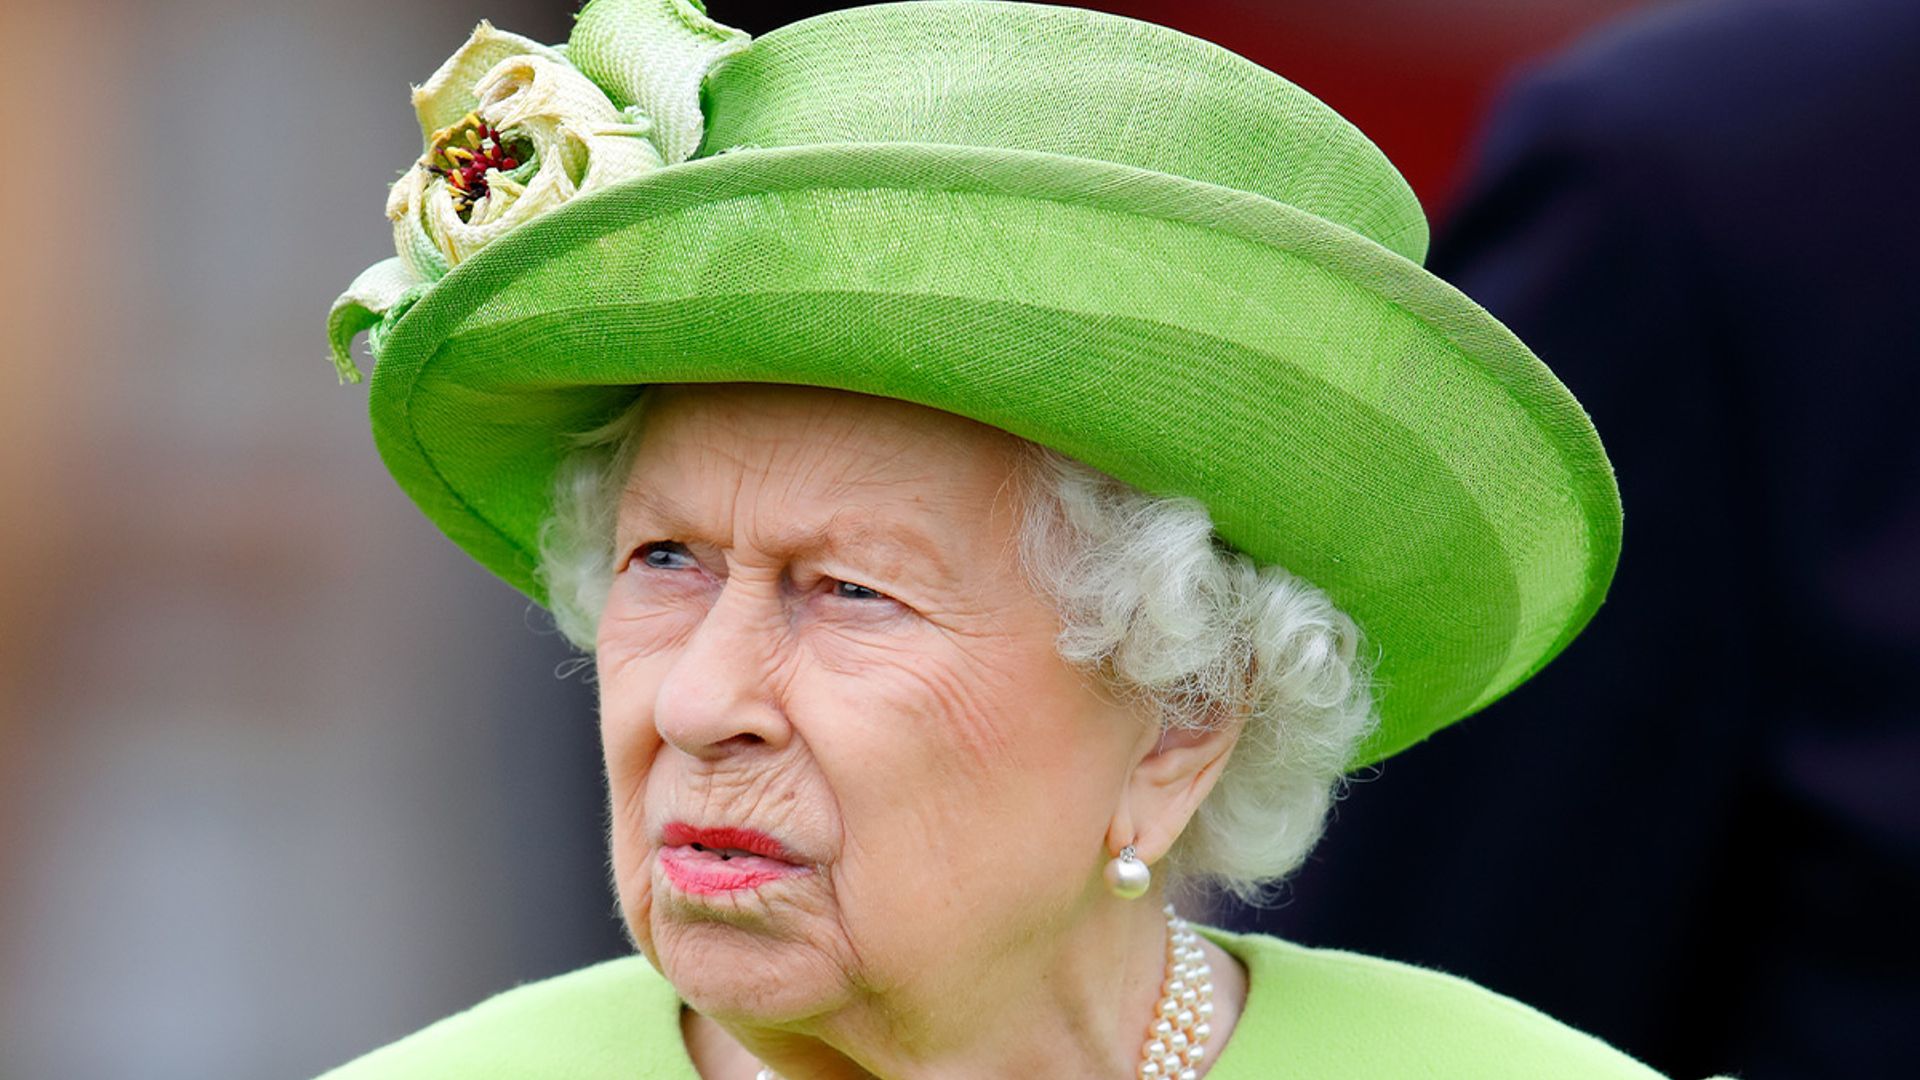 The Queen's latest video of Windsor Castle leaves fans disappointed